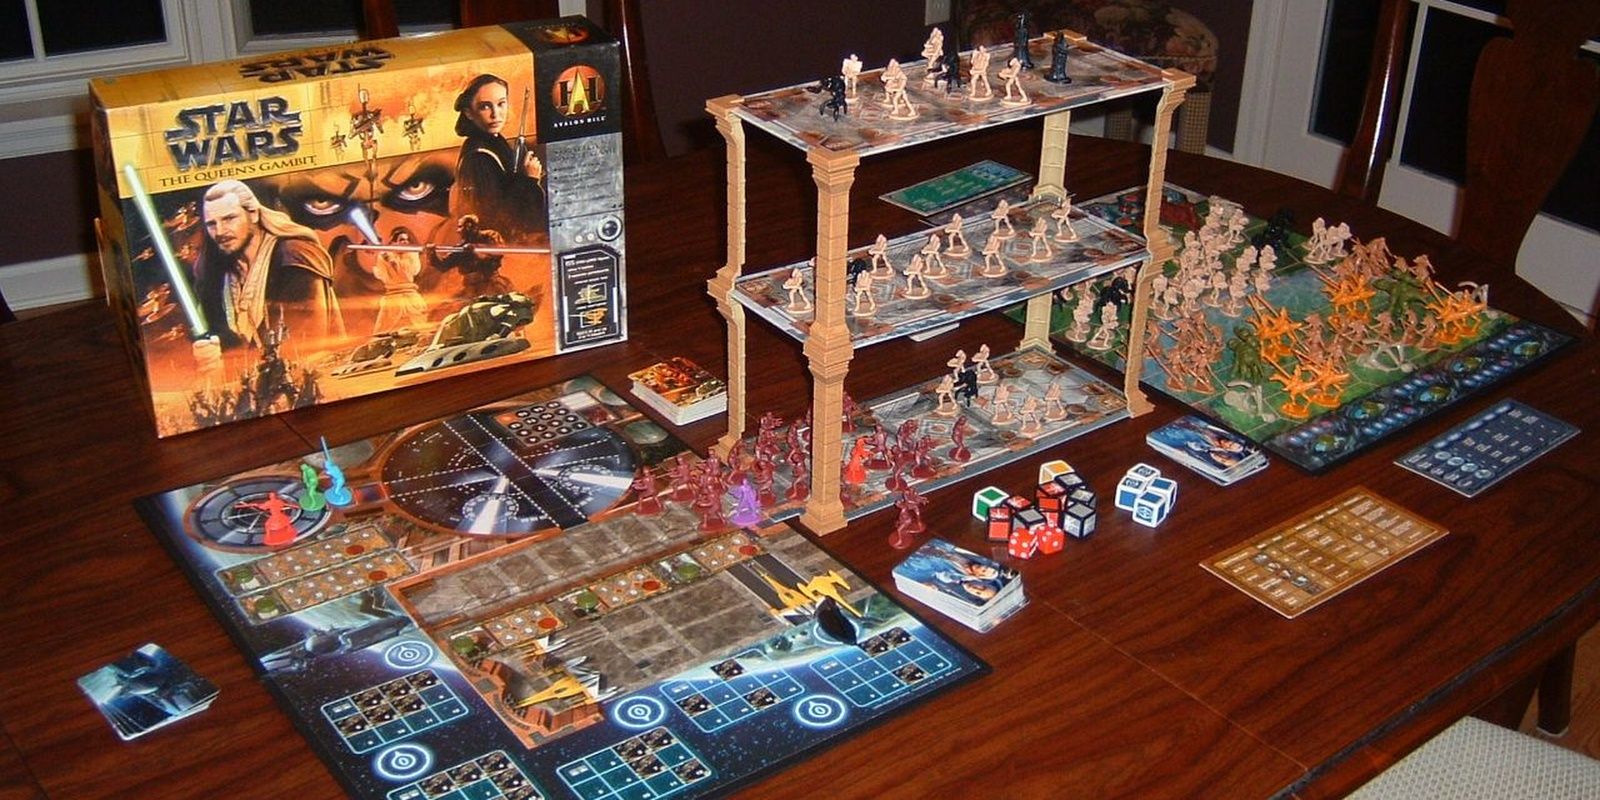 The box and components for Star Wars: The Queen's Gambit board game